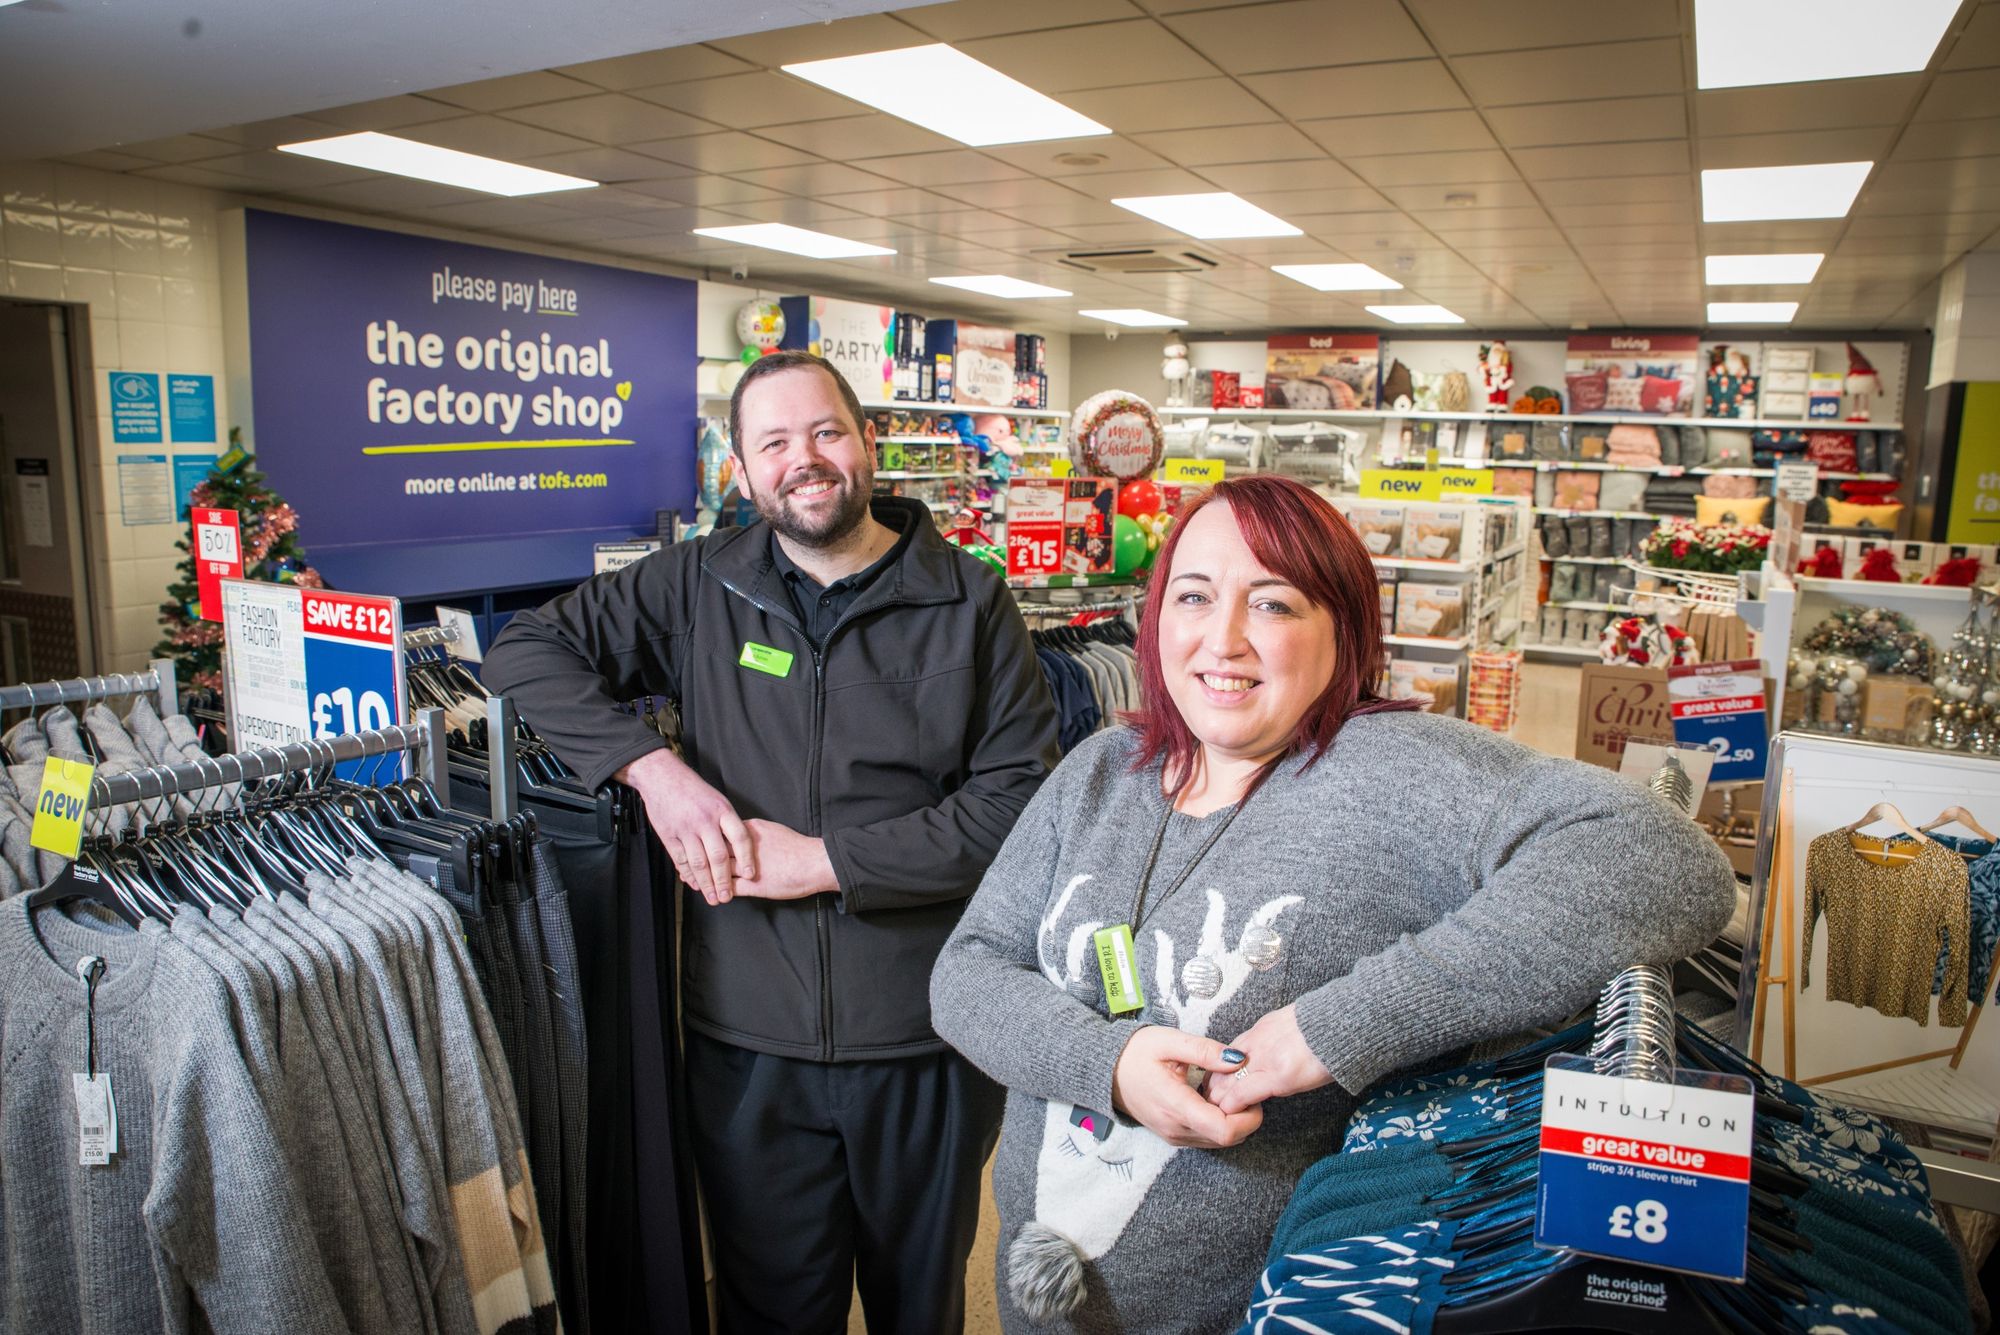 Central England Co-op partners with The Original Factory Shop in boost to Derbyshire town centre